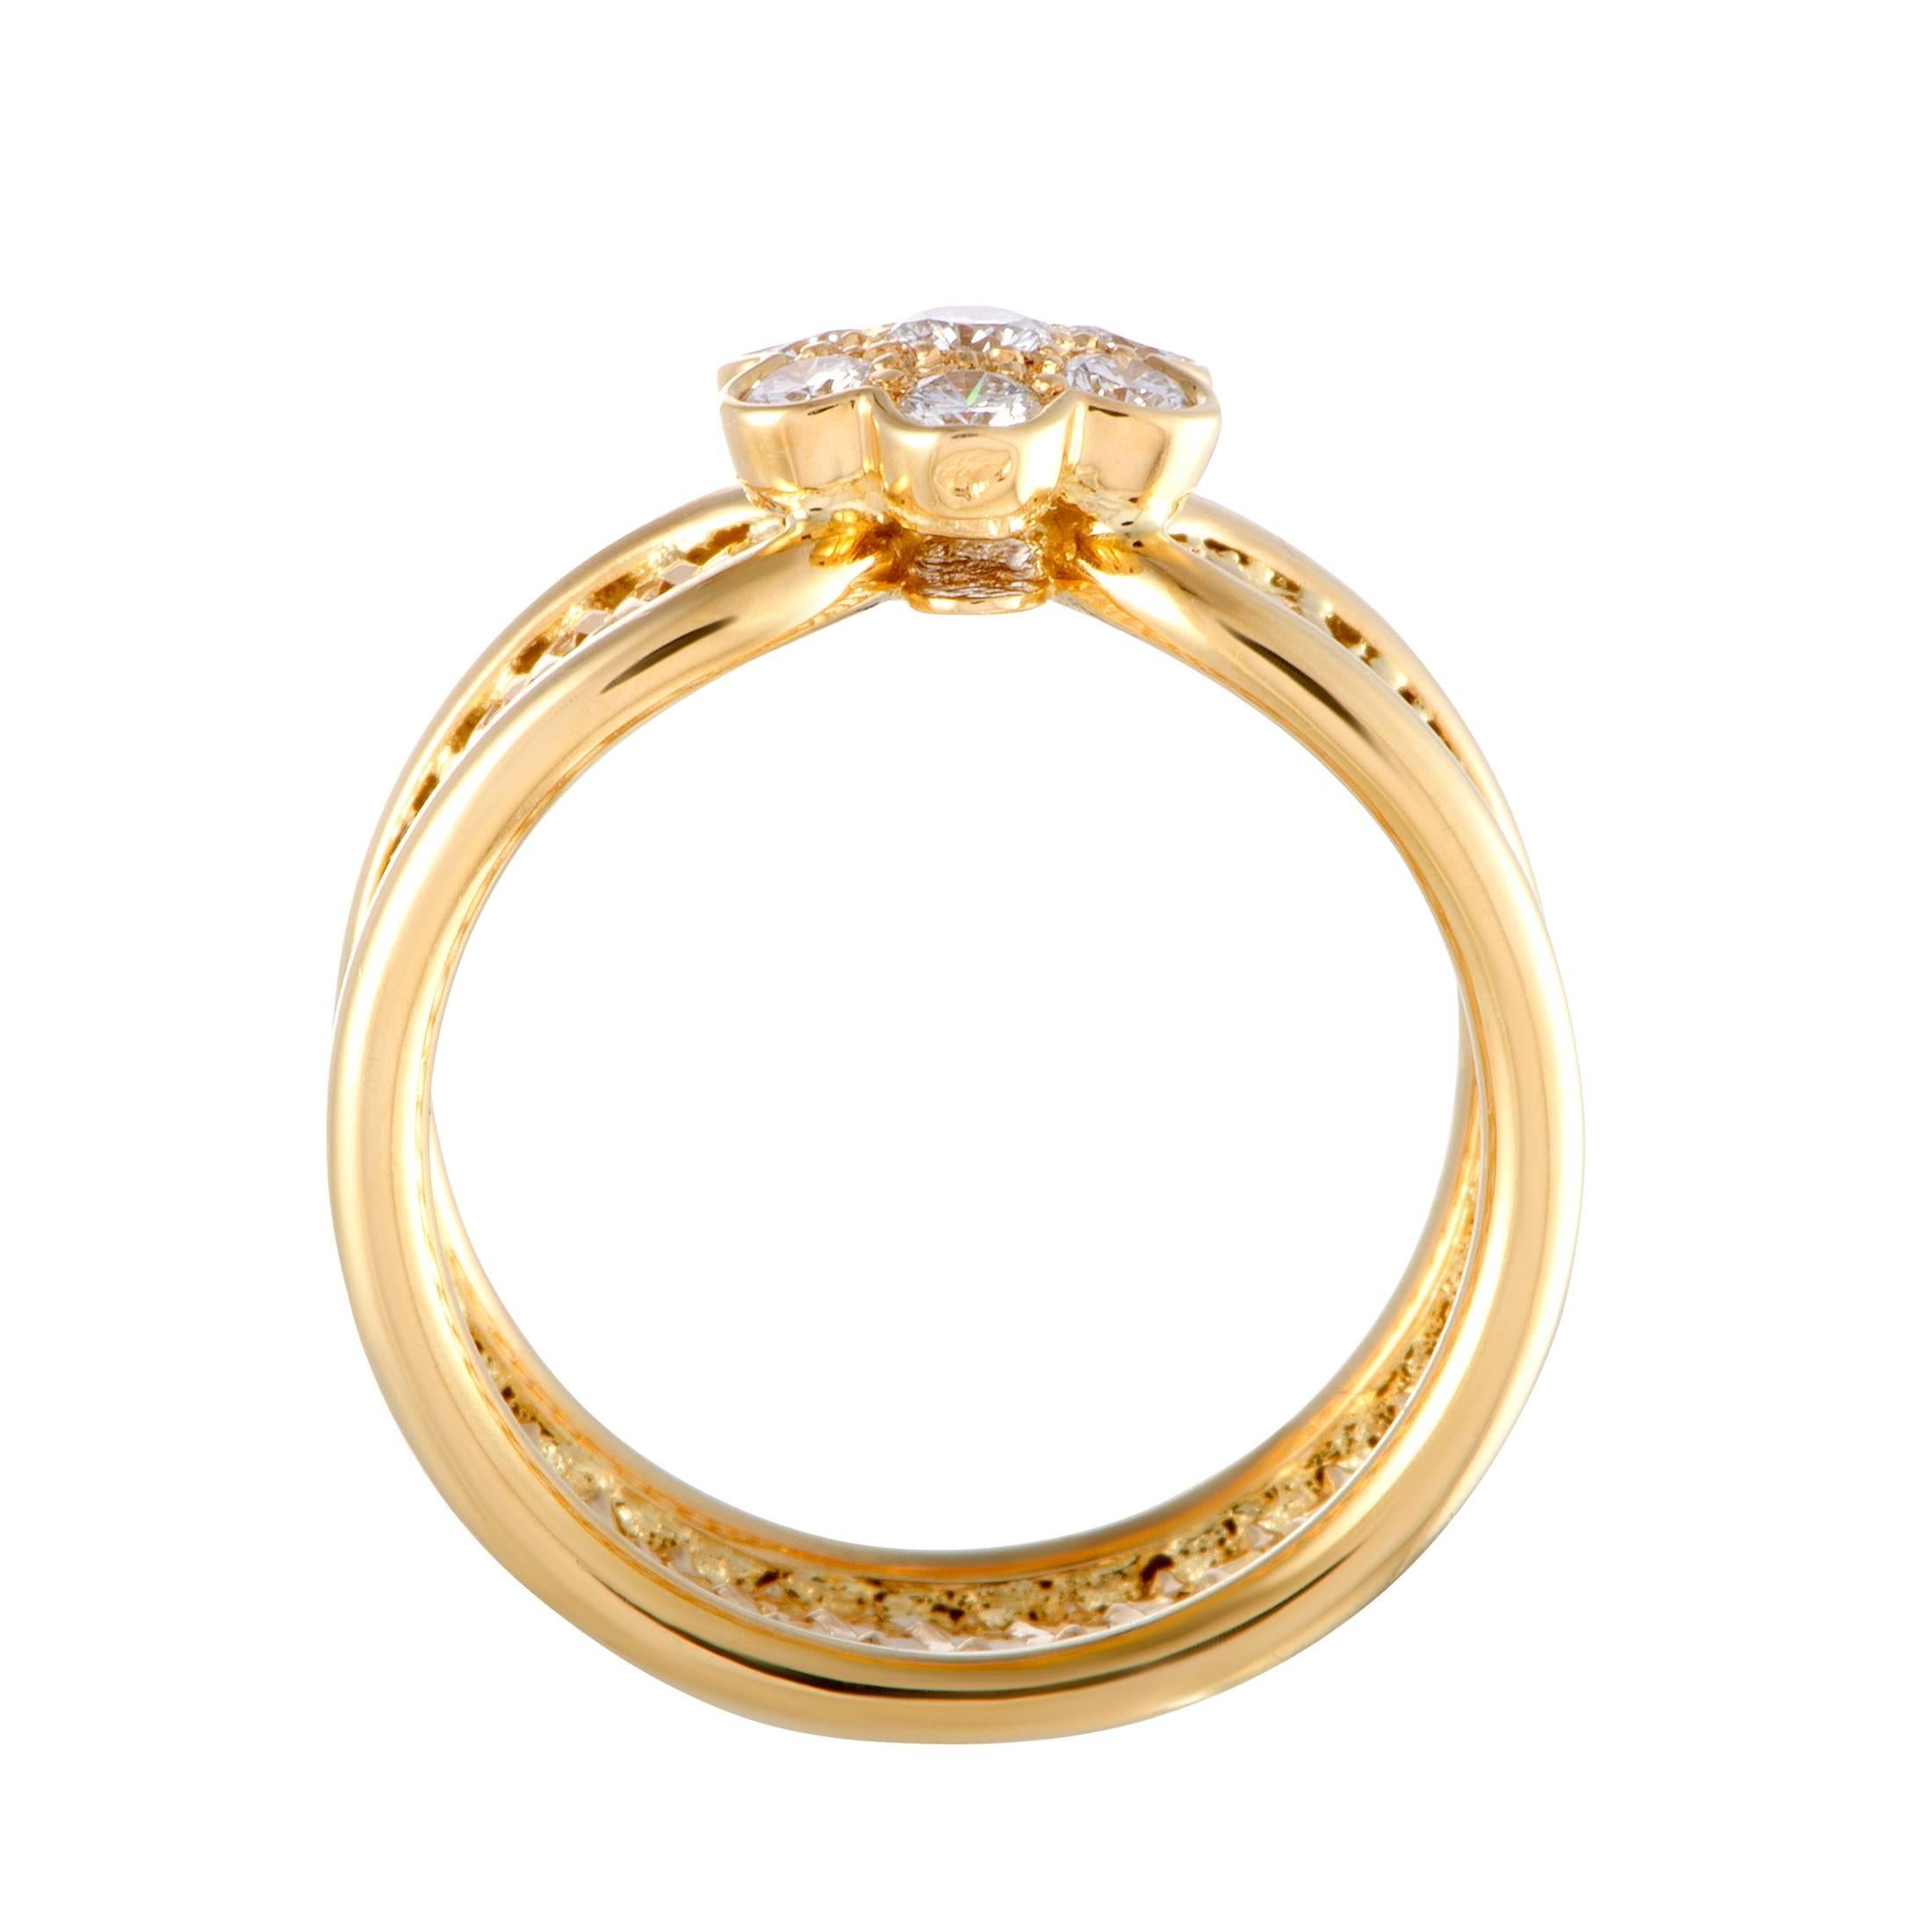 An exceptionally refined design is magnificently presented in luxurious 18K yellow gold in this gorgeous Van Cleef & Arpels ring. The ring weighs five grams and it is beautifully embellished with glistening diamonds.
Ring Top Dimensions: 10mmx